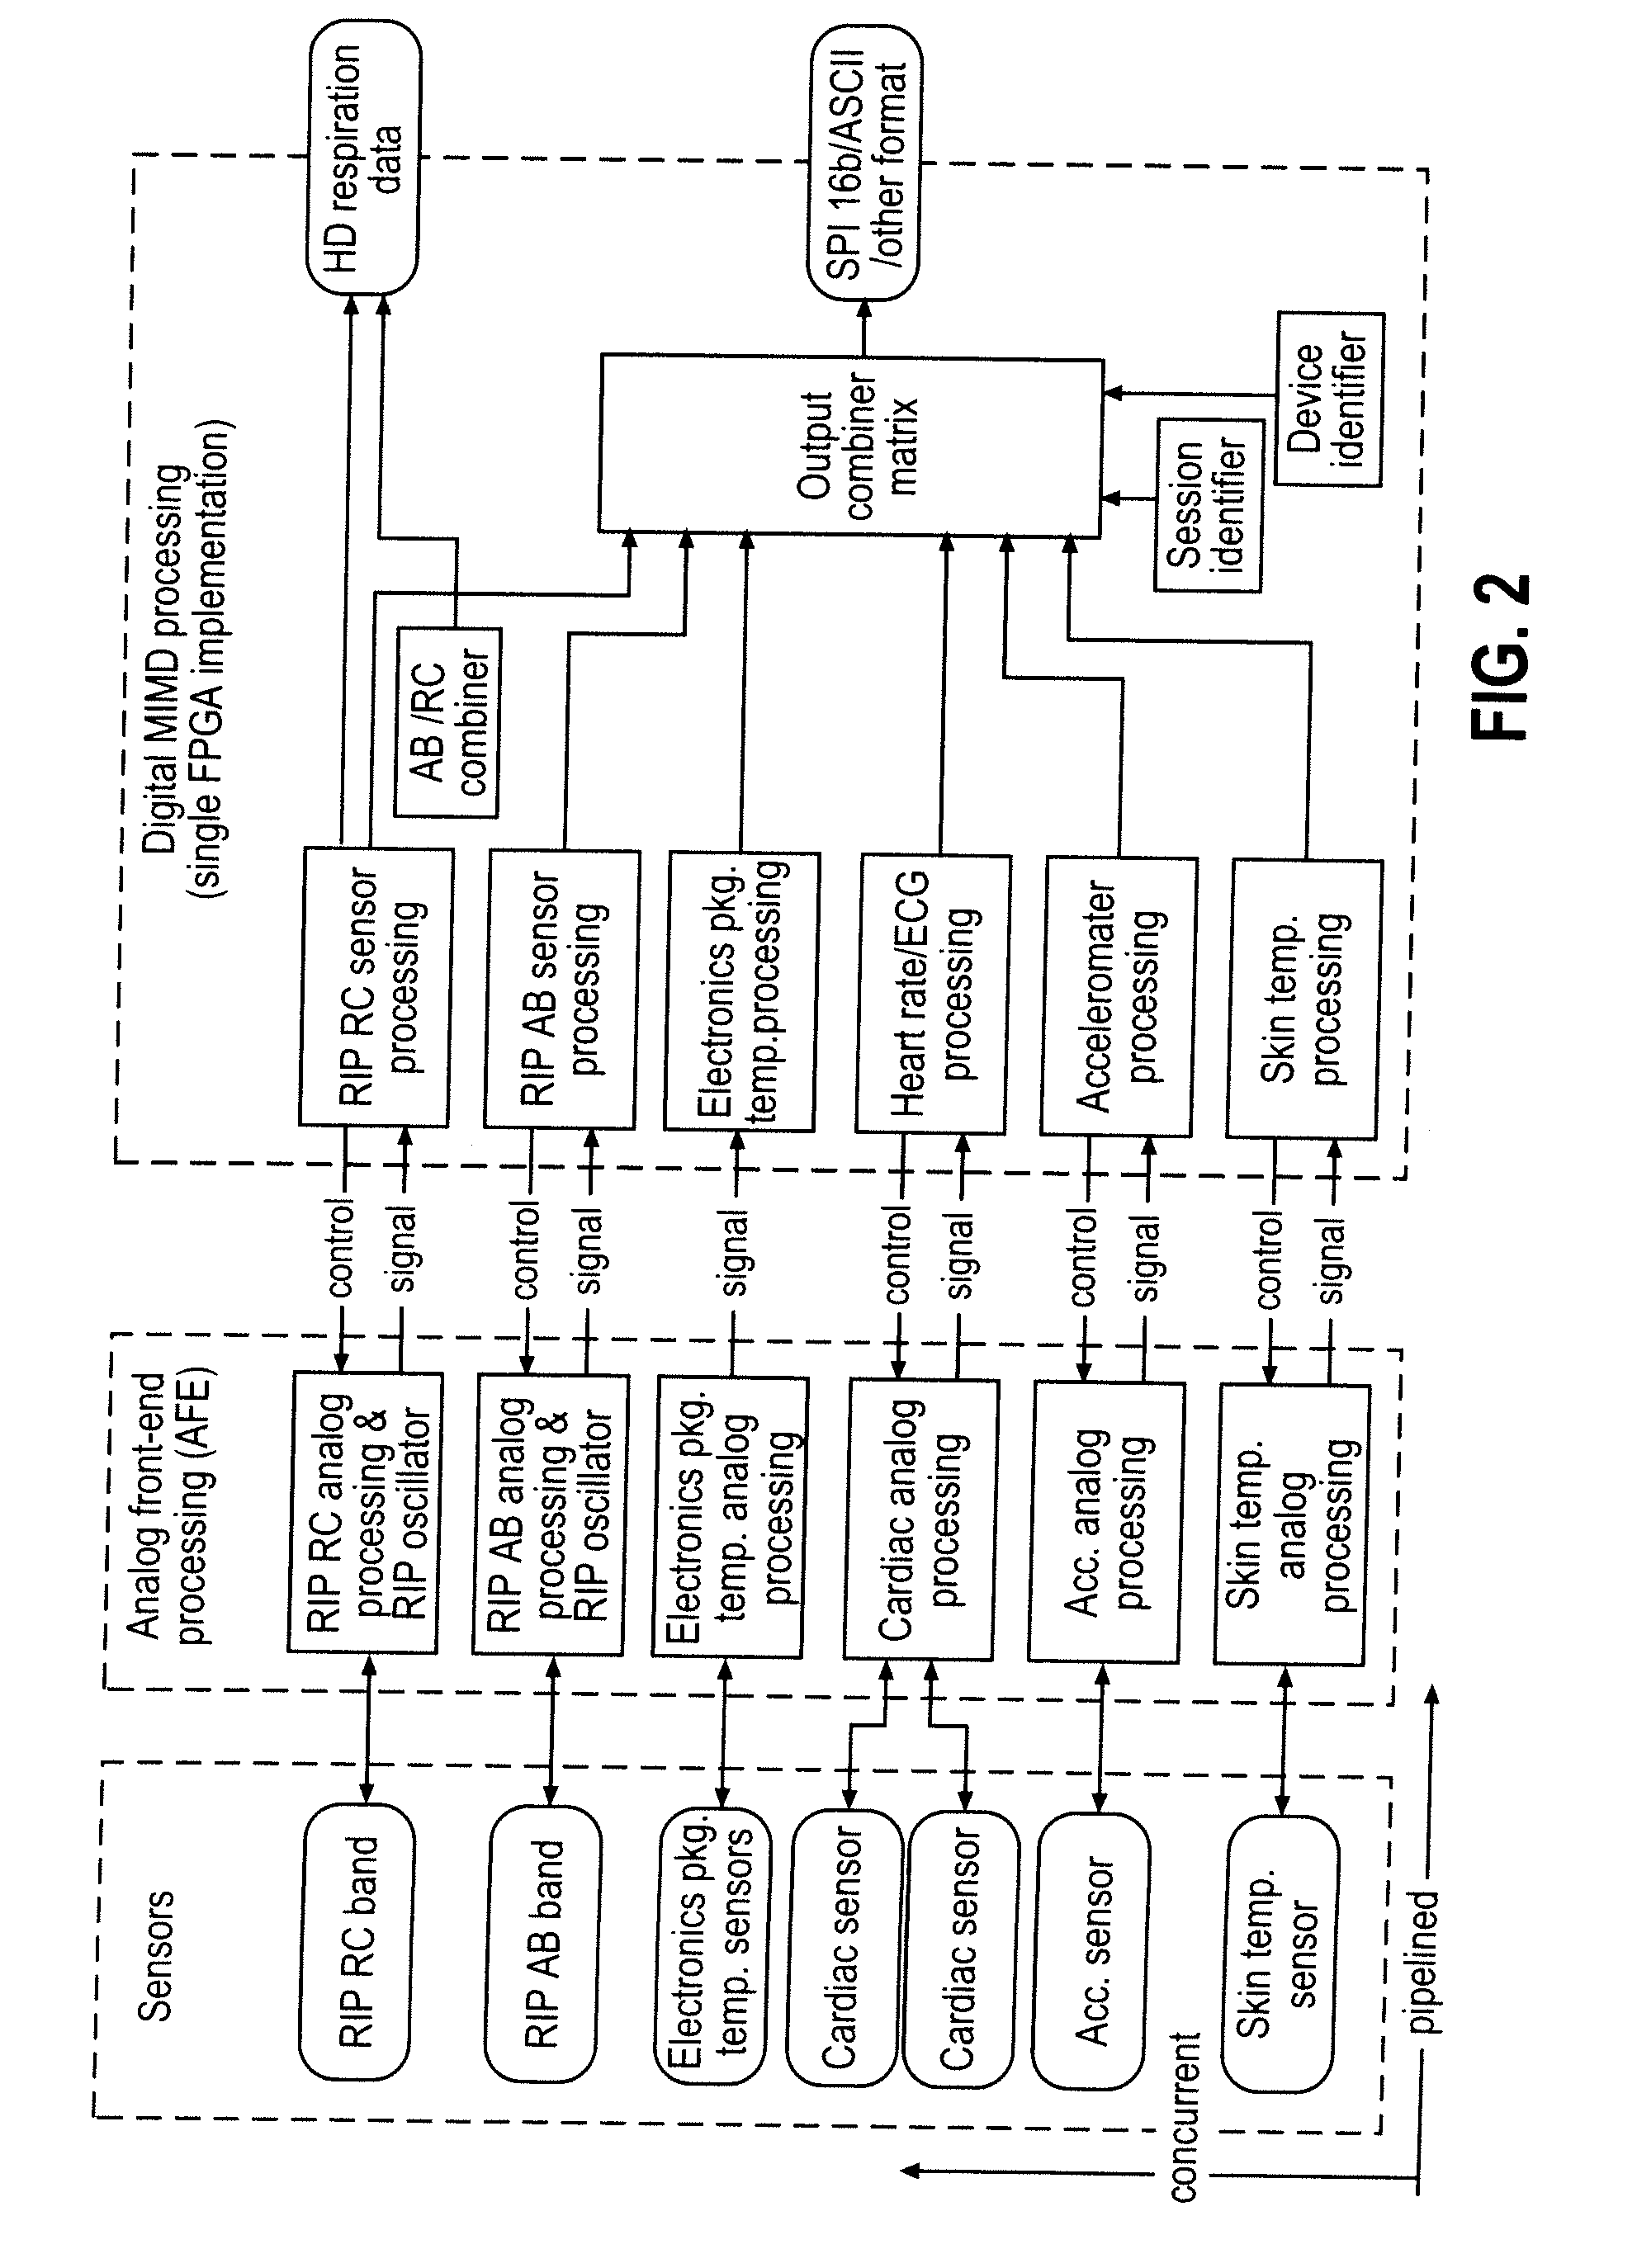 Physiological signal processing devices and associated processing methods